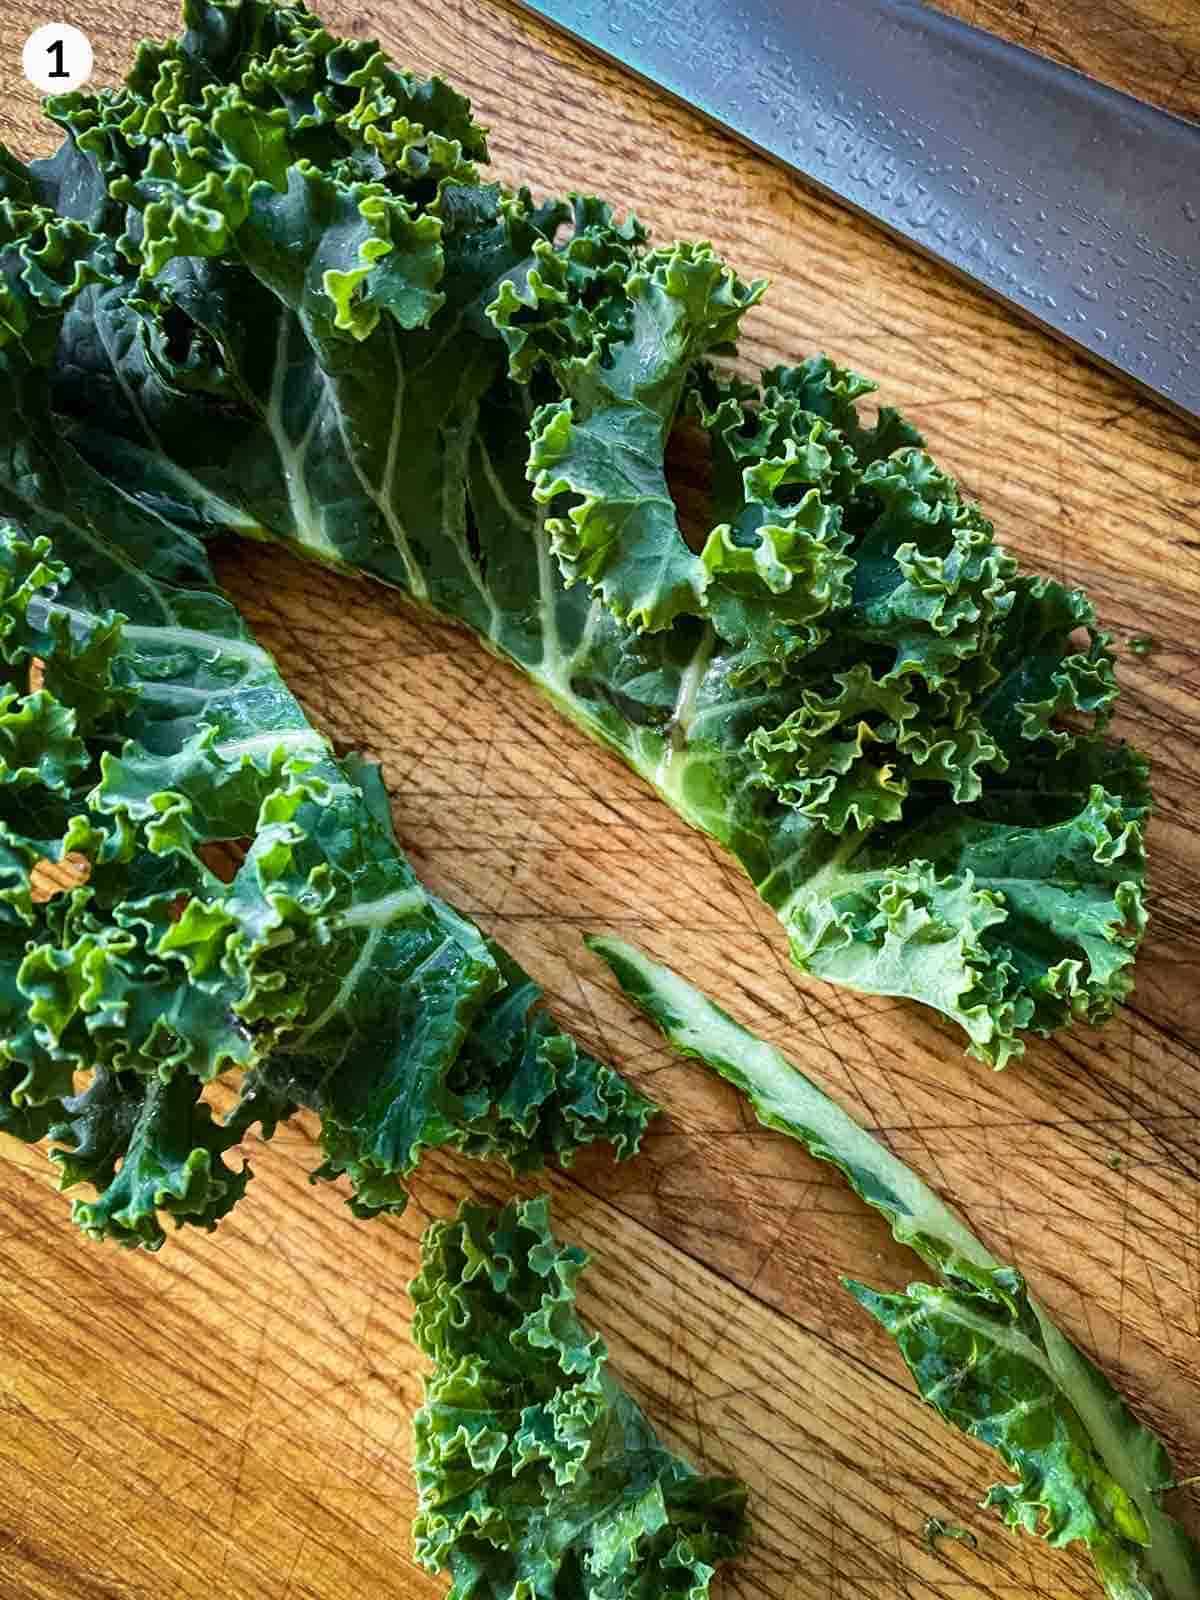 removing the rib from kale on a wooden board